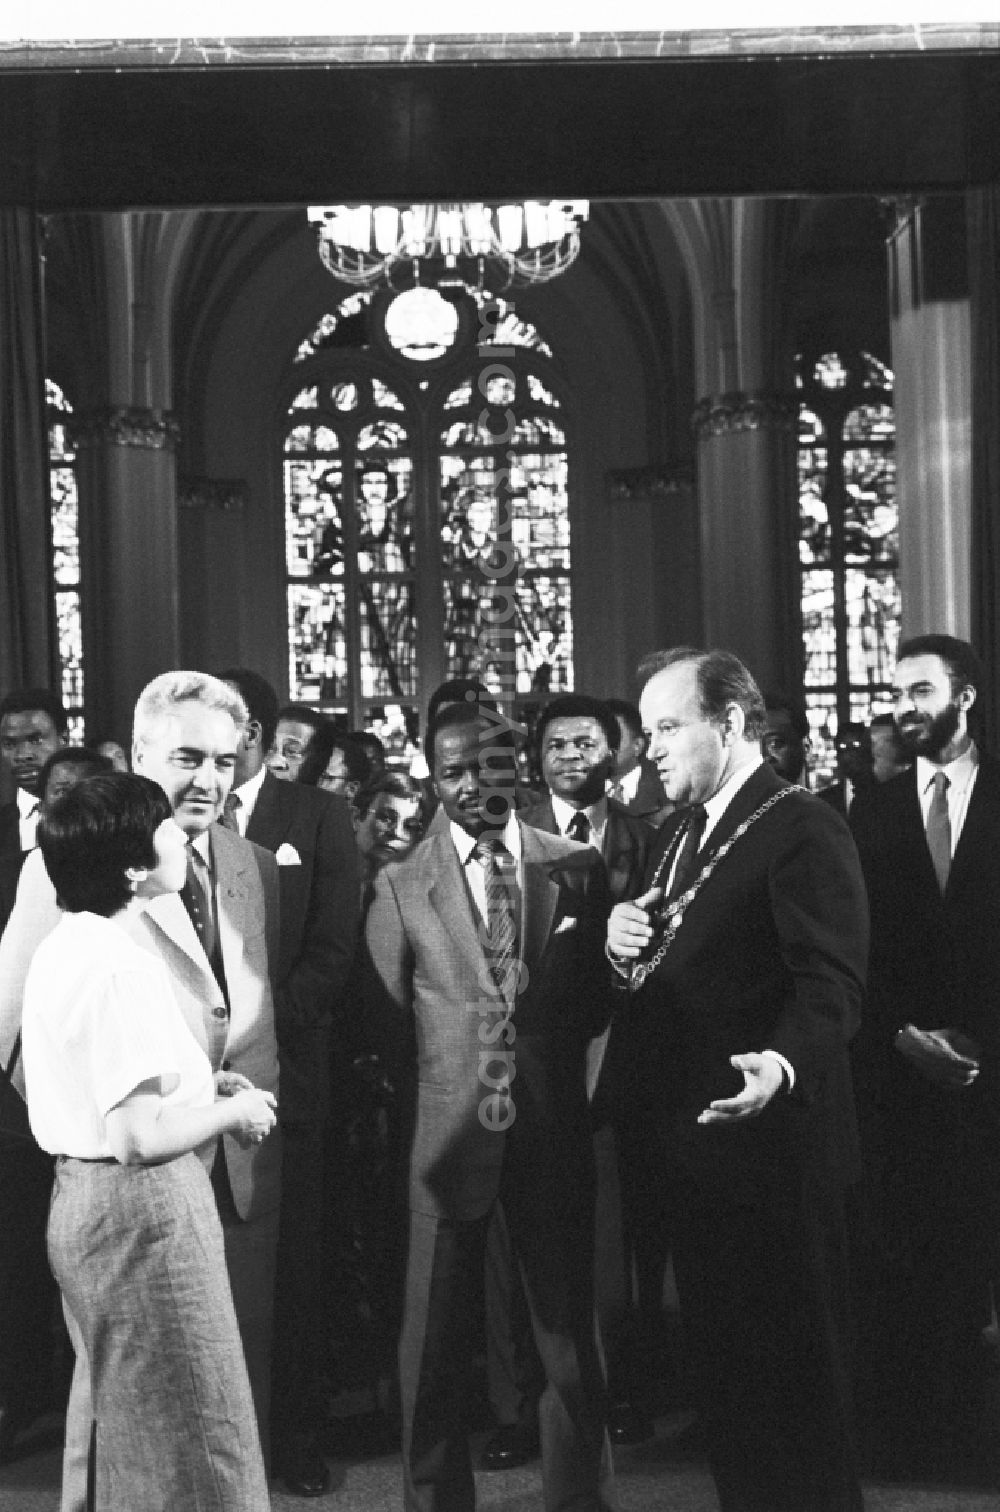 GDR picture archive: Berlin - State visit of the President of Mozambique Joaquim Alberto Chissanon in the Red City Hall of Berlin, the former capital of the GDR, German Democratic Republic. In the picture with the Lord Mayor of East Berlin Erhard Krack